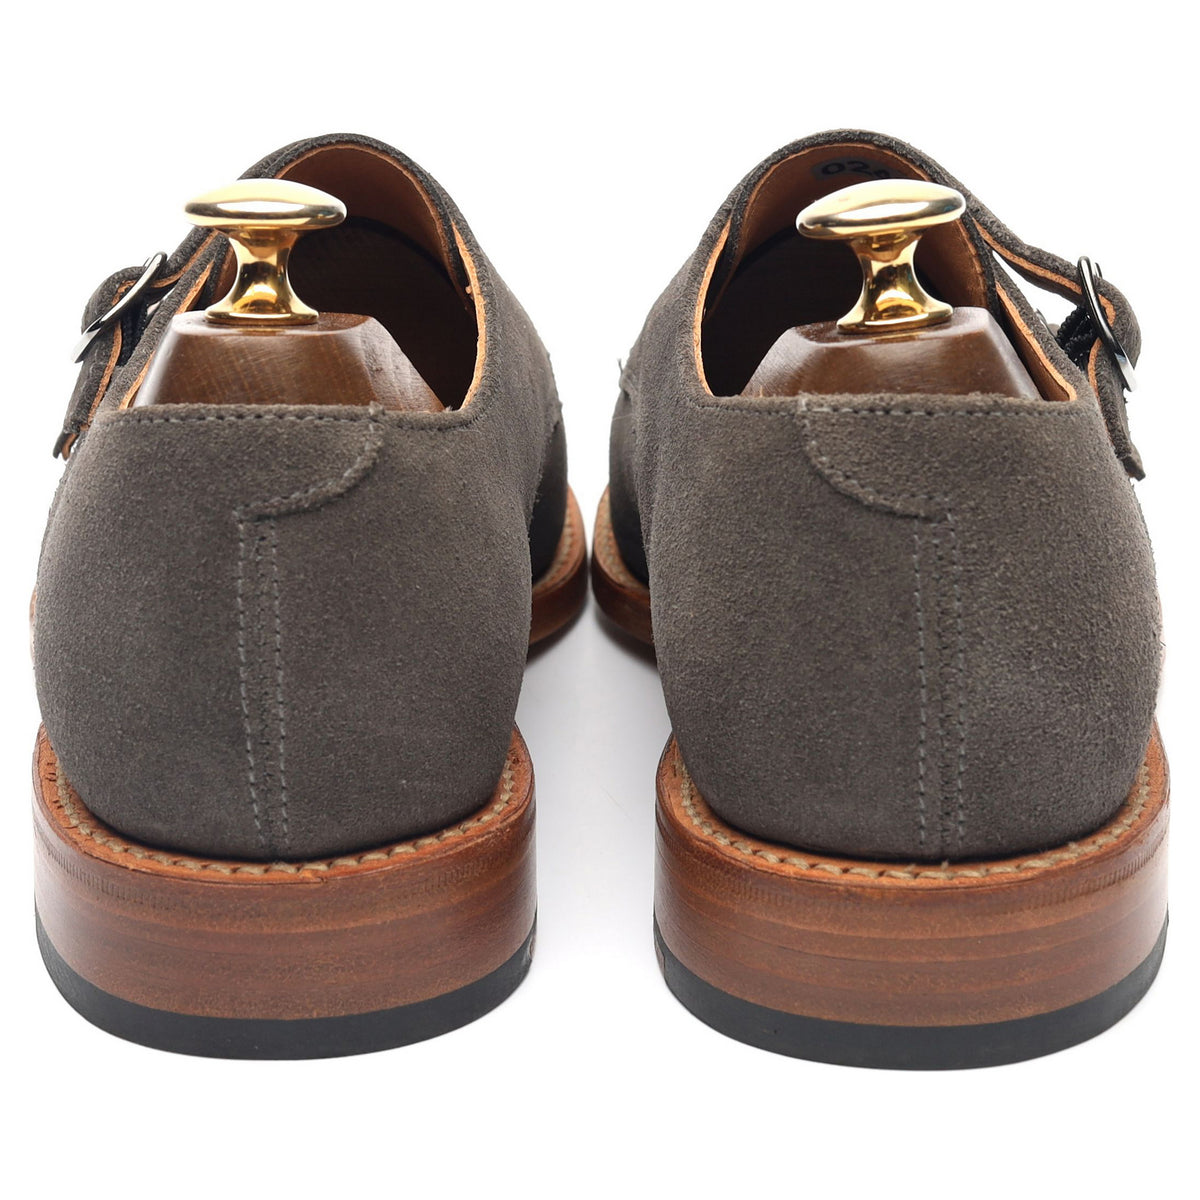 Grey Suede Double Monk Strap UK 6 F